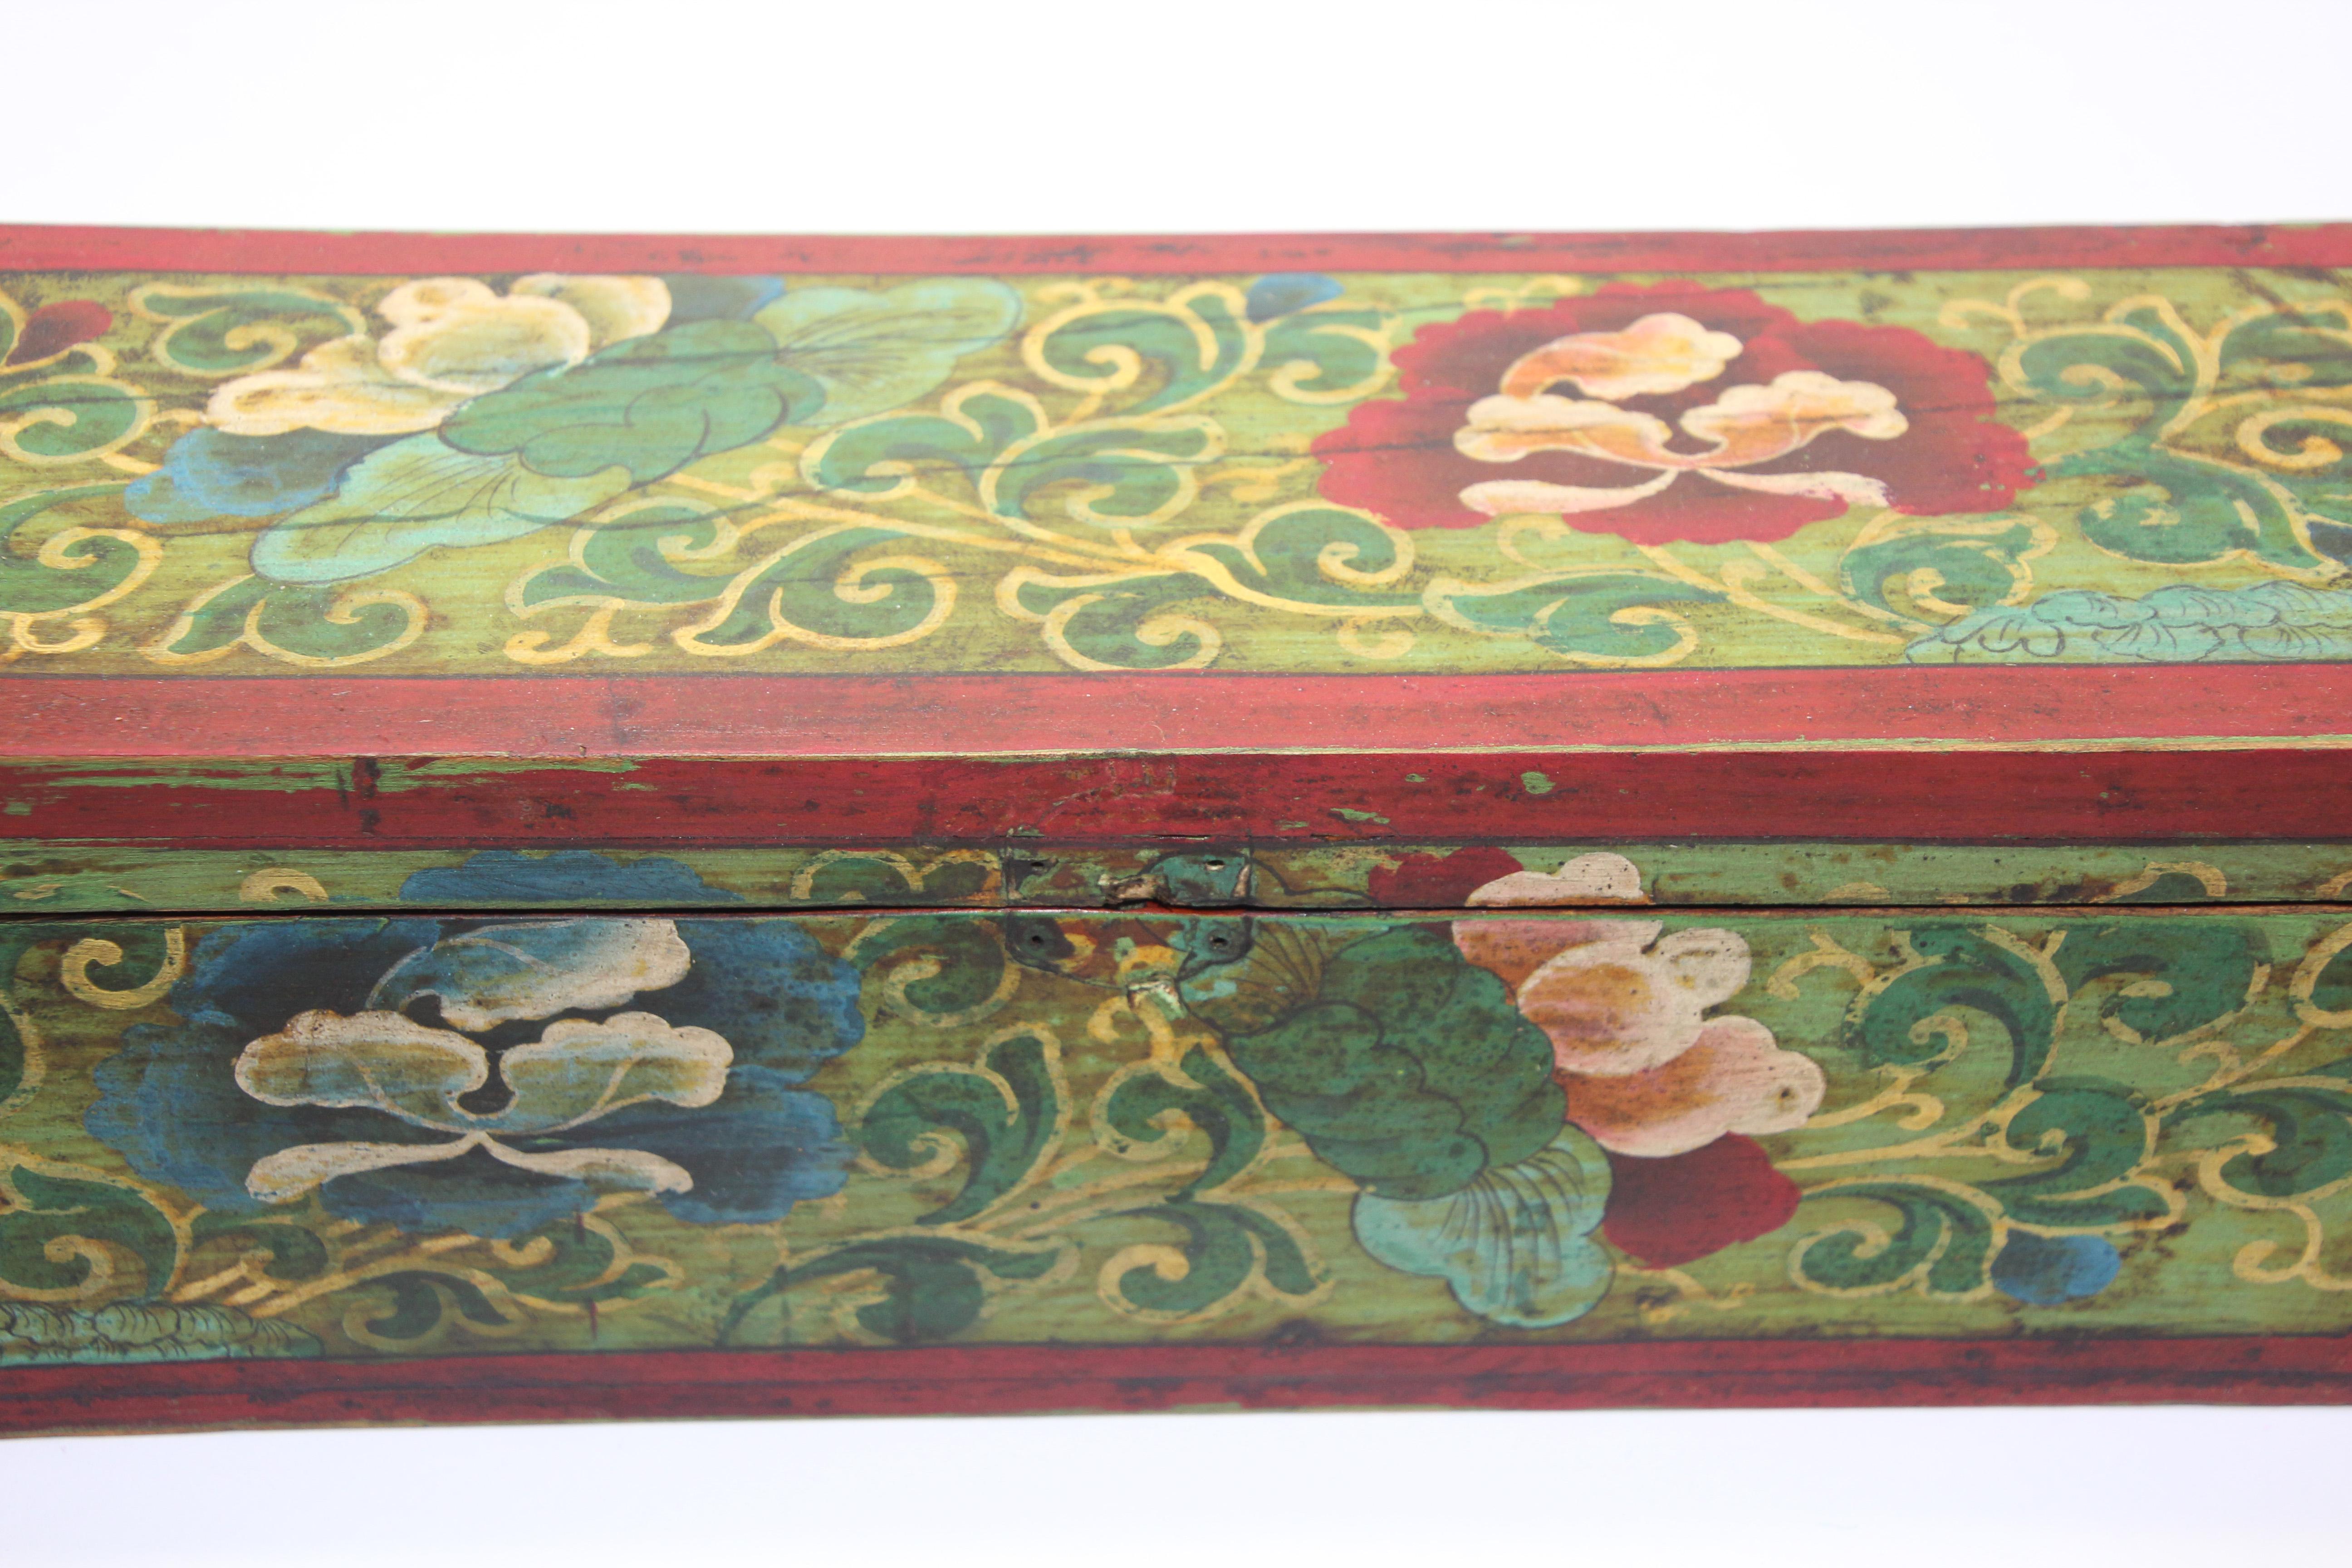 Tibetan Hand Painted Decorative Box with Floral Designs 8